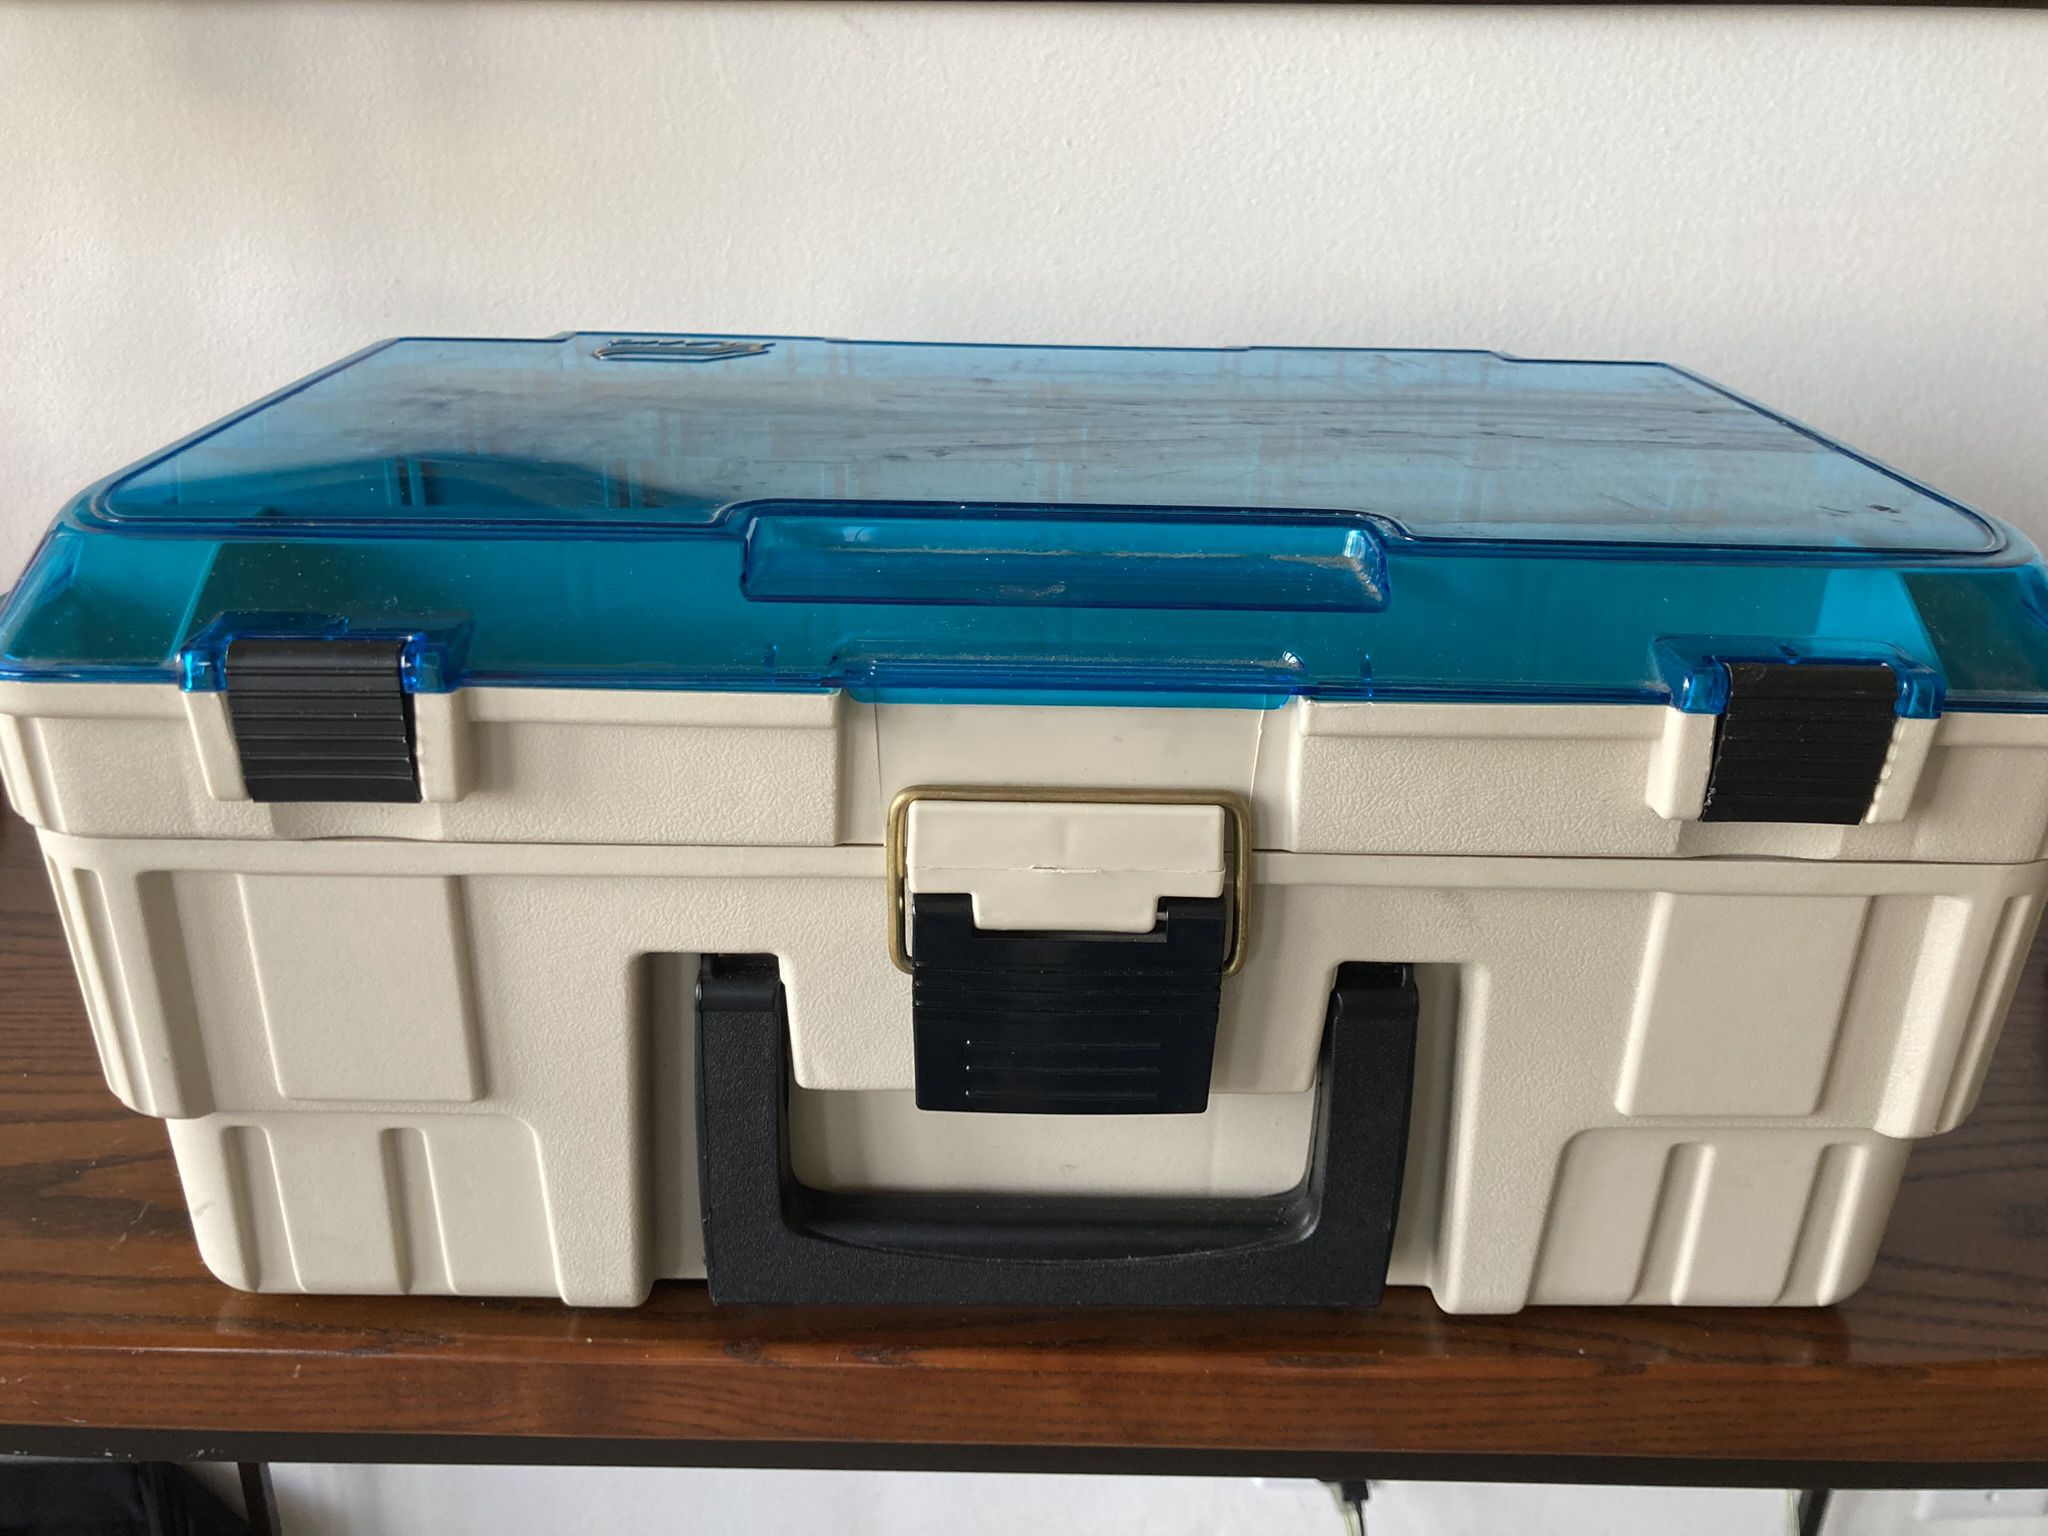 Large fishing Tackle Box for Sale in Santa Monica, CA - OfferUp